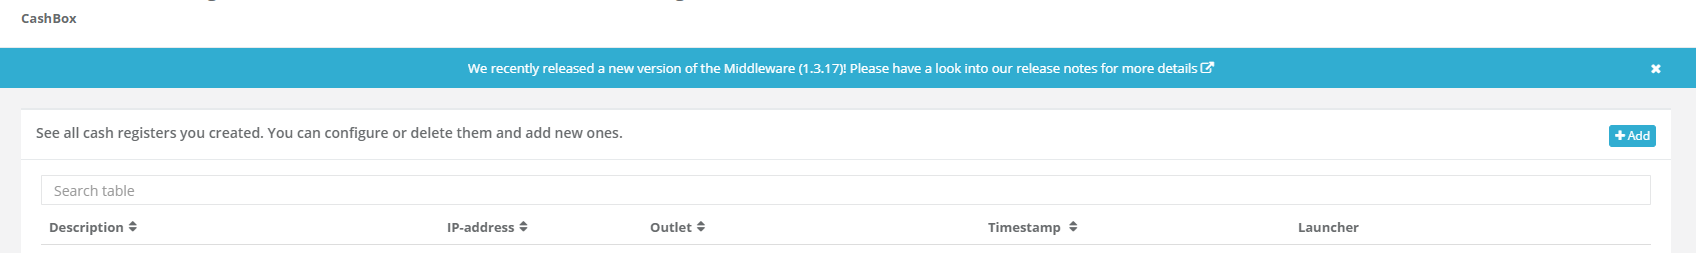 middleware-release-information